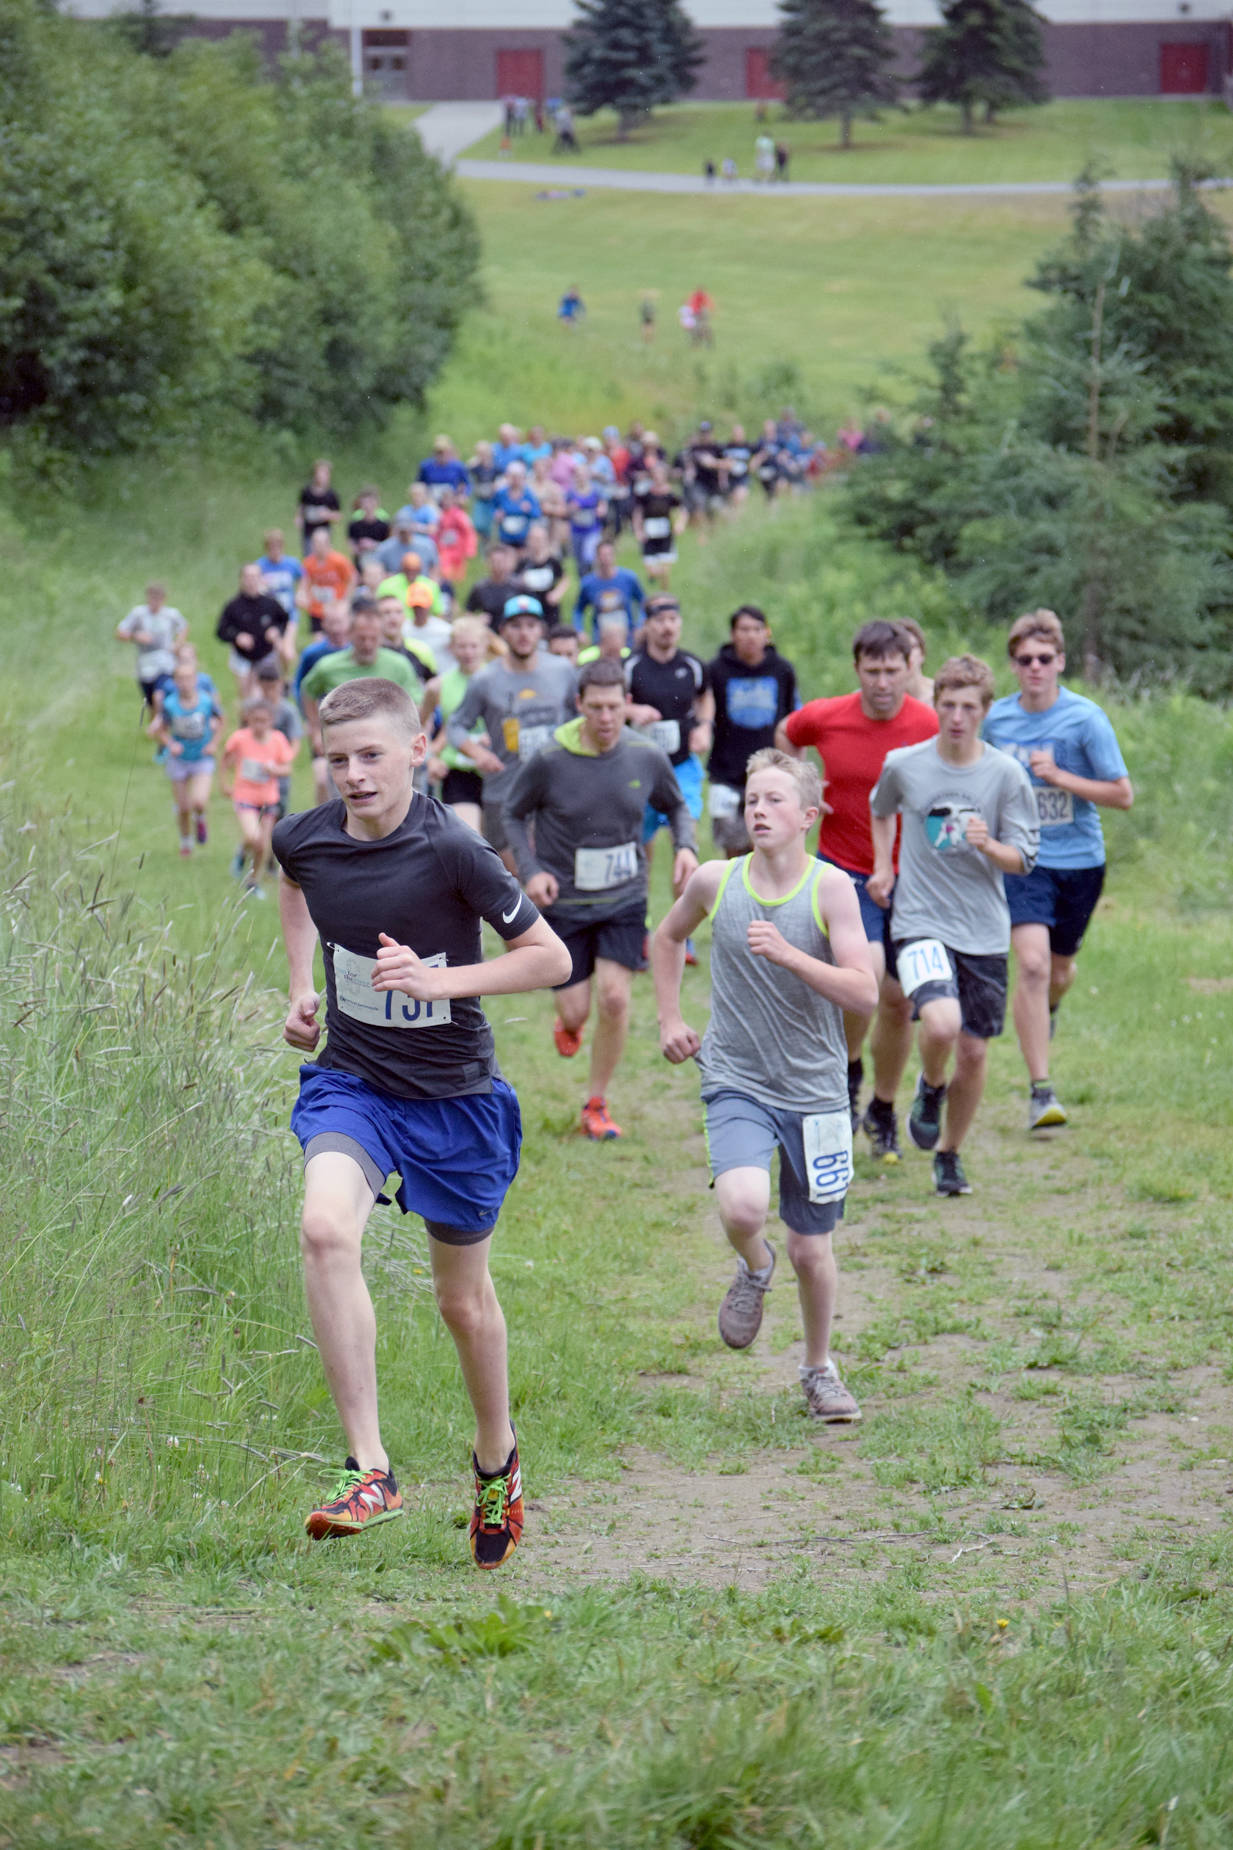 Lance Chilton leads the pack in the five-kilometer Salmon Run Series race up Angle Hill on Wednesday, July 19, 2017, at Tsalteshi Trails in Soldotna. Chilton would hold on to take the victory. (Photo by Jeff Helminiak/Peninsula Clarion)